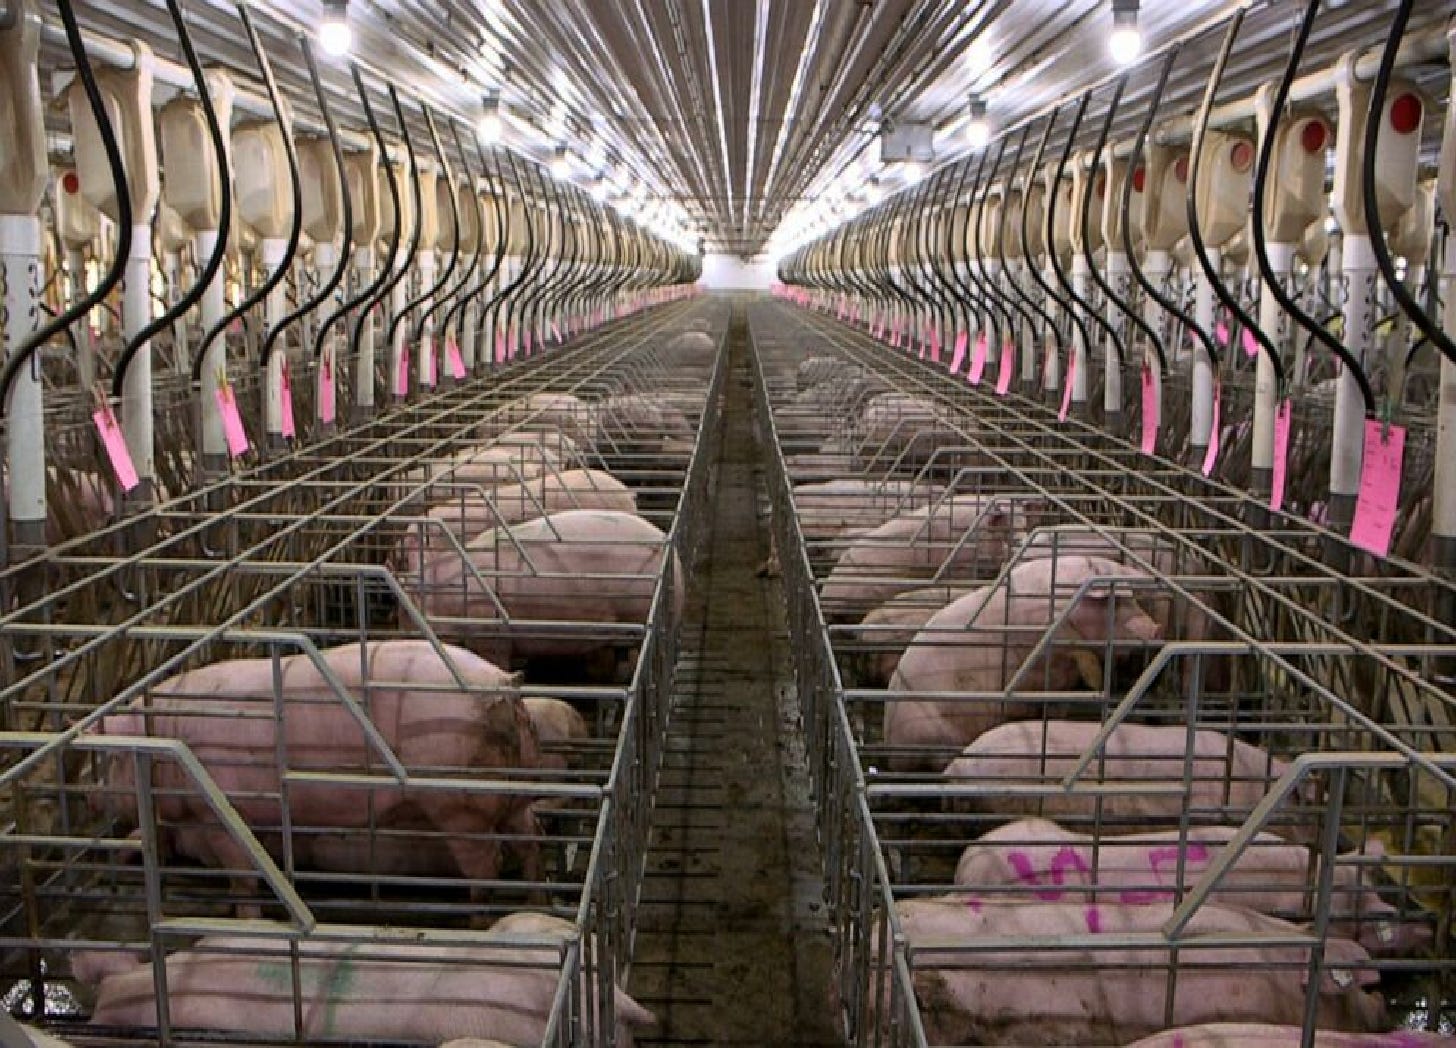 Rows of pigs trapped in gestation crates.